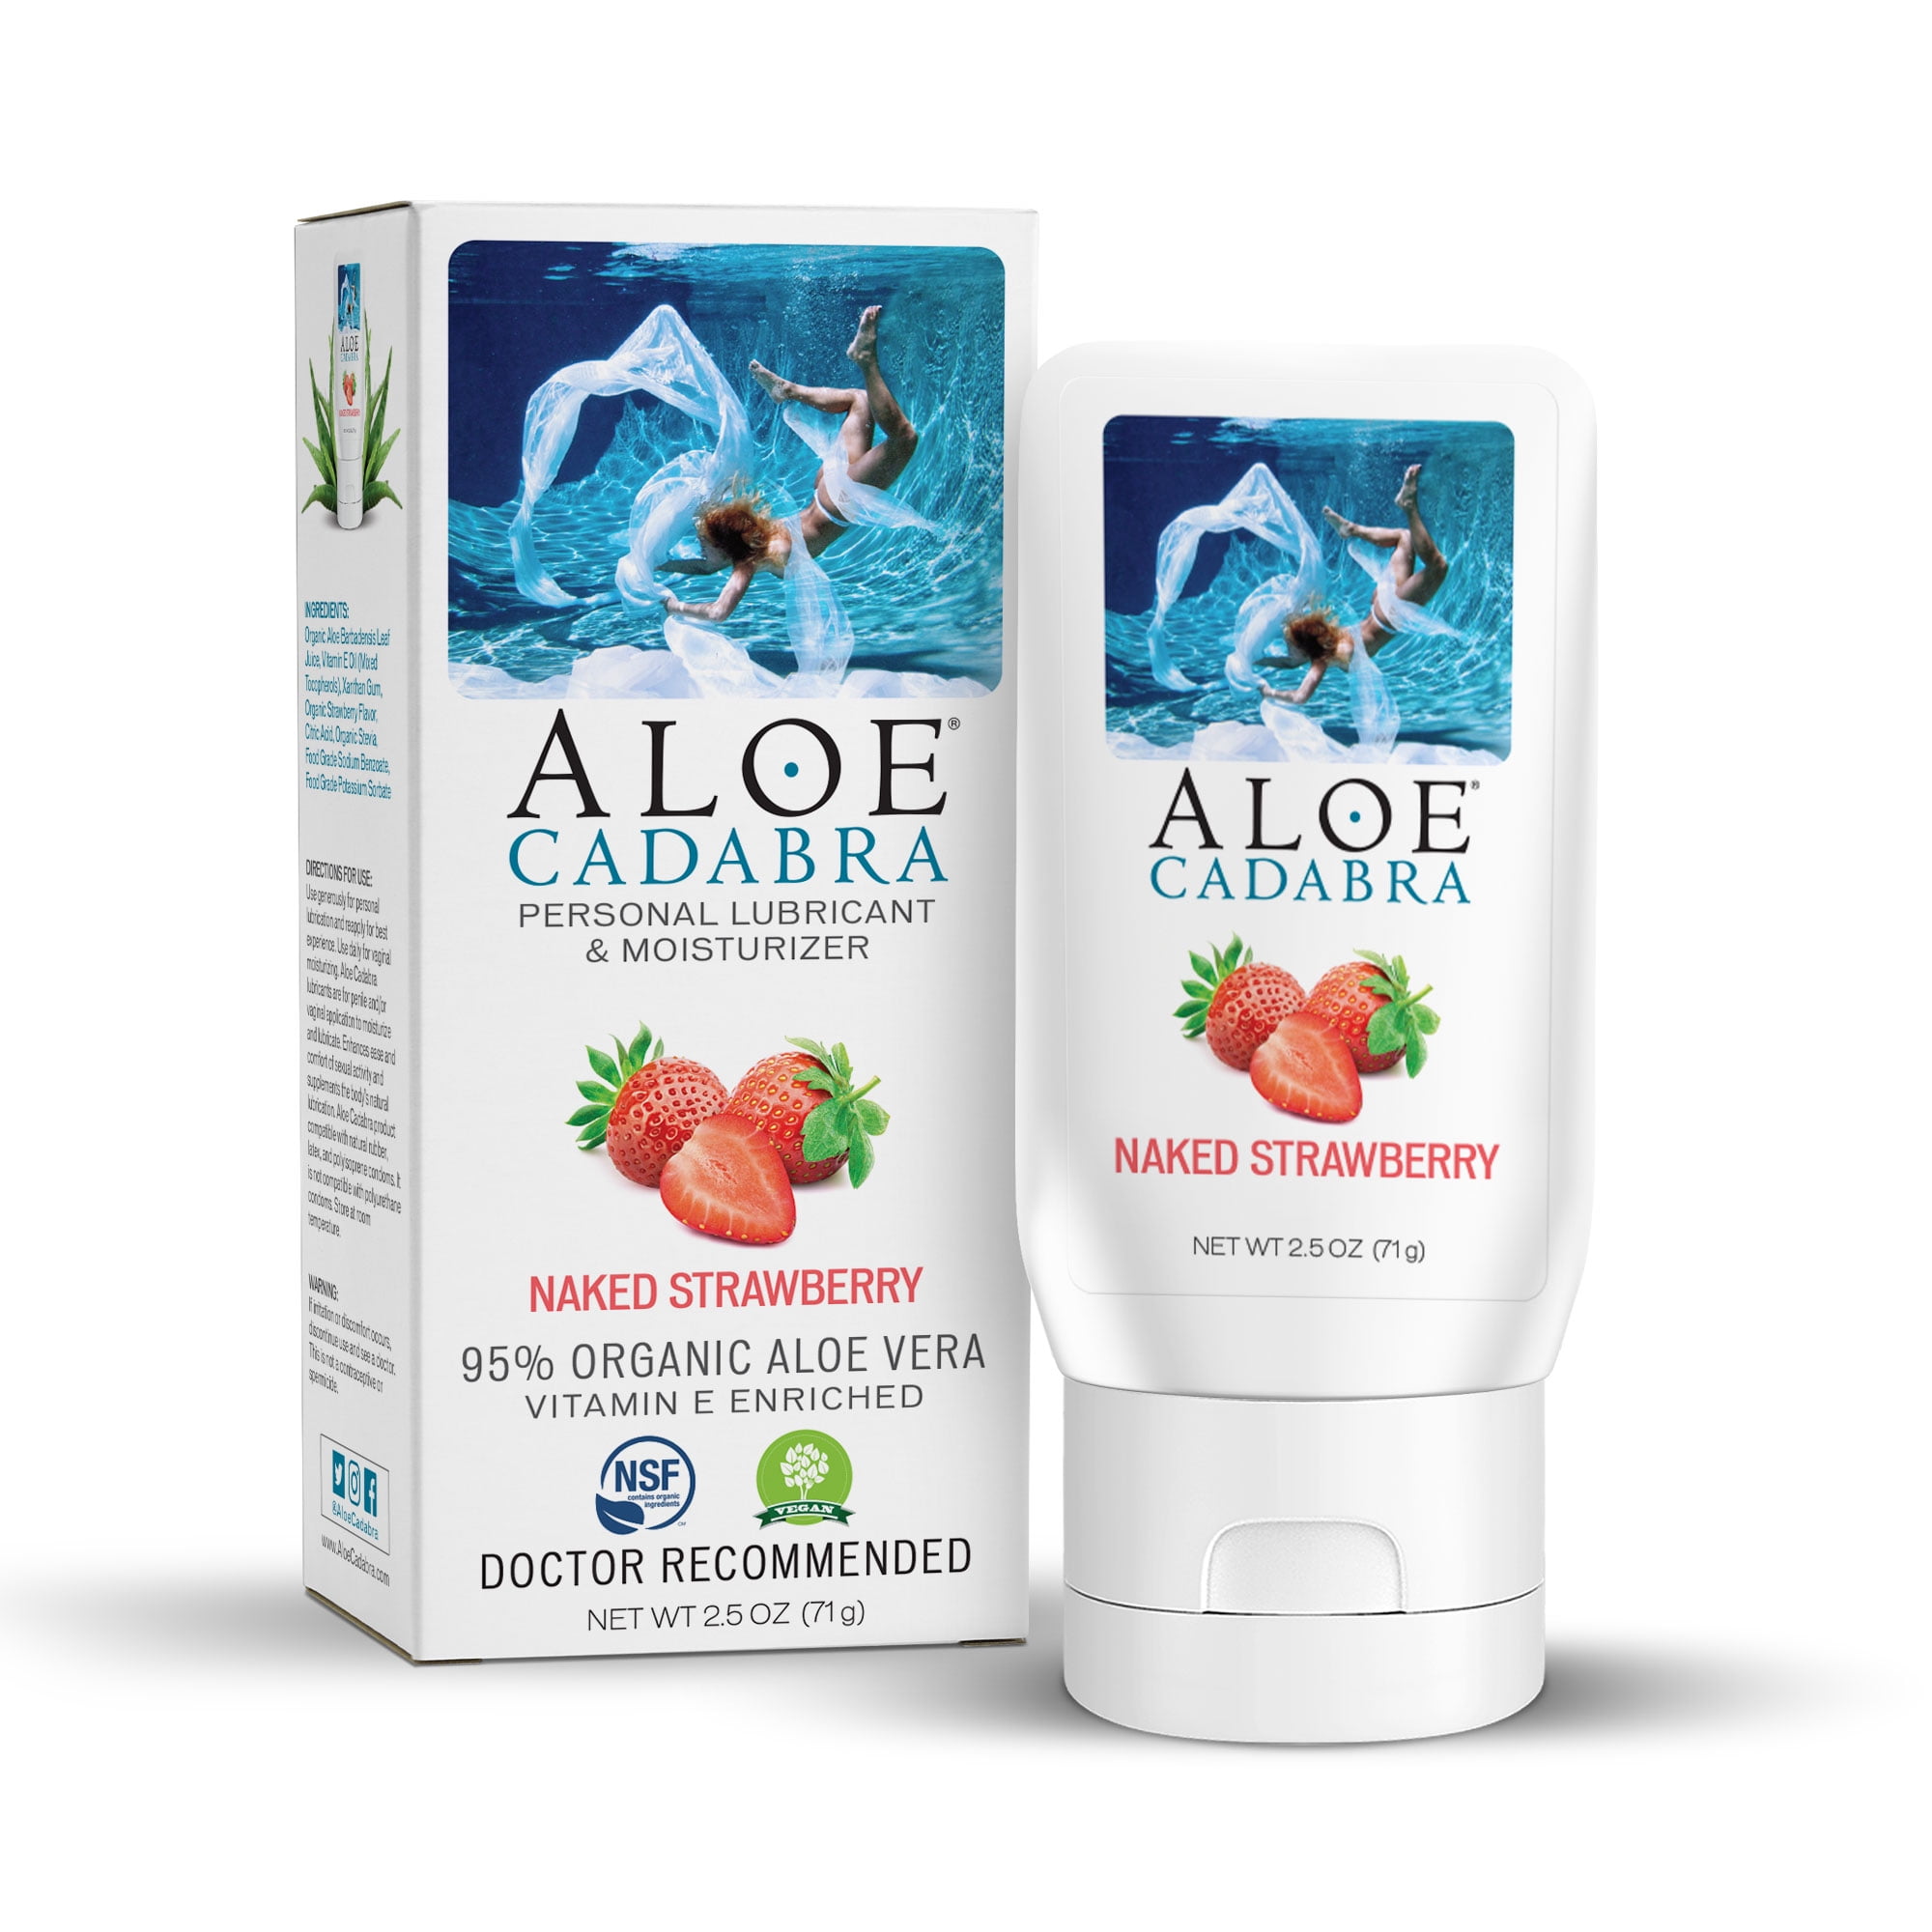 Aloe Cadabra Organic Natural Personal Lube Sex Vegan Edible Naked Strawberry 2.5oz picture picture